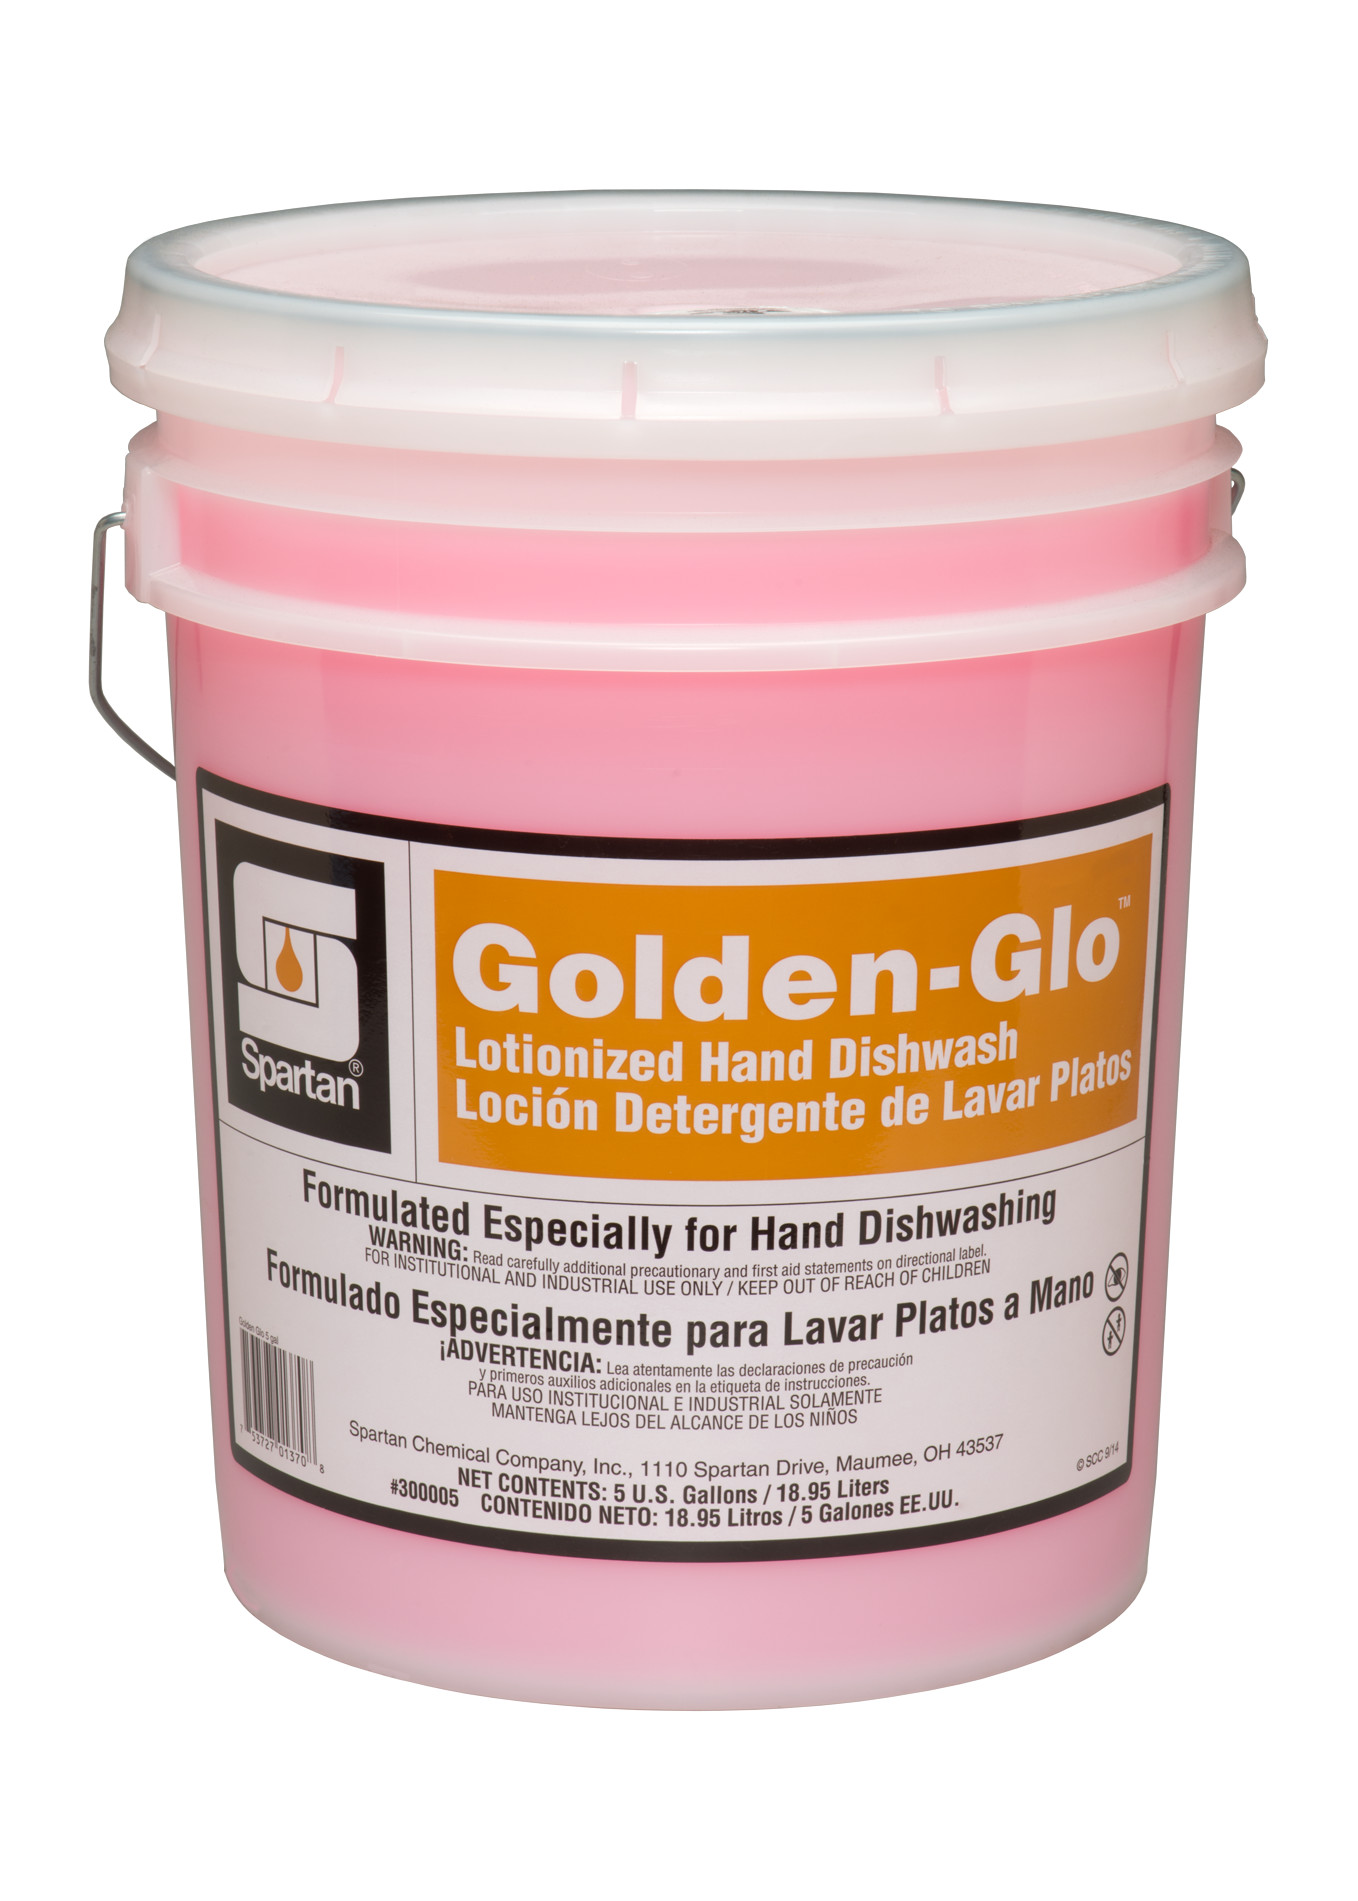 Spartan Chemical Company Golden-Glo, 5 GAL PAIL